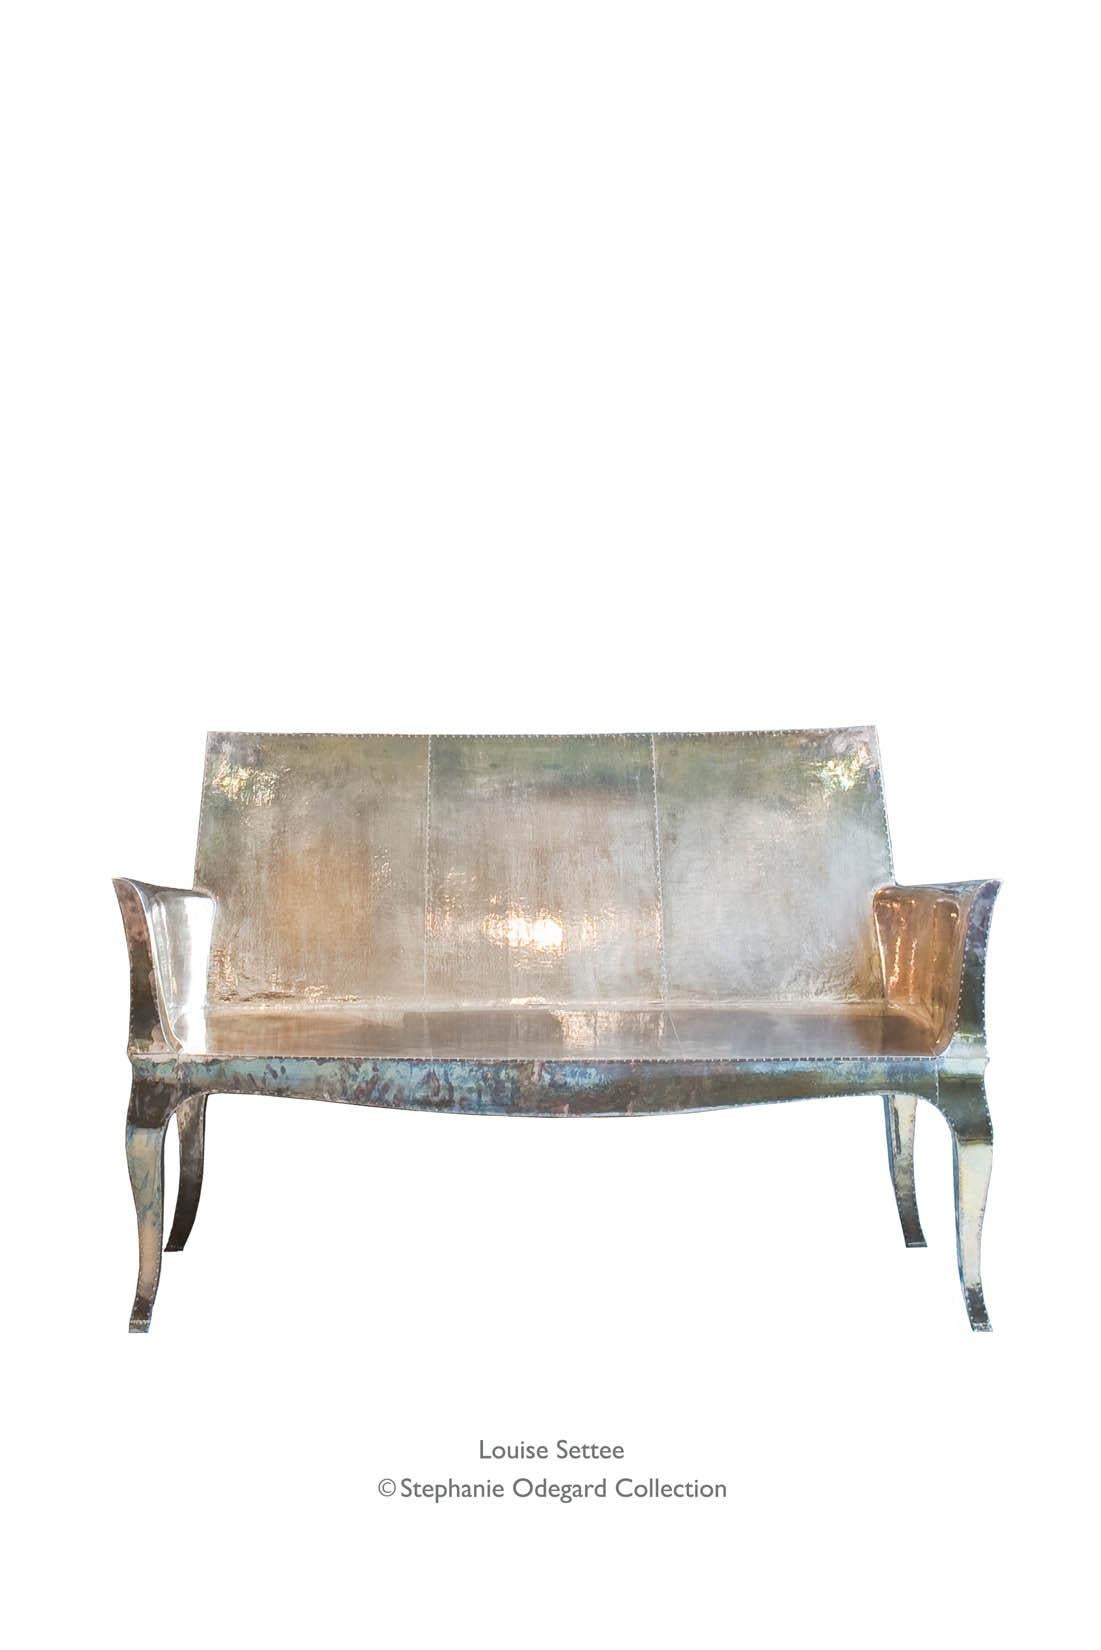 Louise Settee Art Deco Loveseats in Mid. Hammered Antique Bronze   For Sale 6